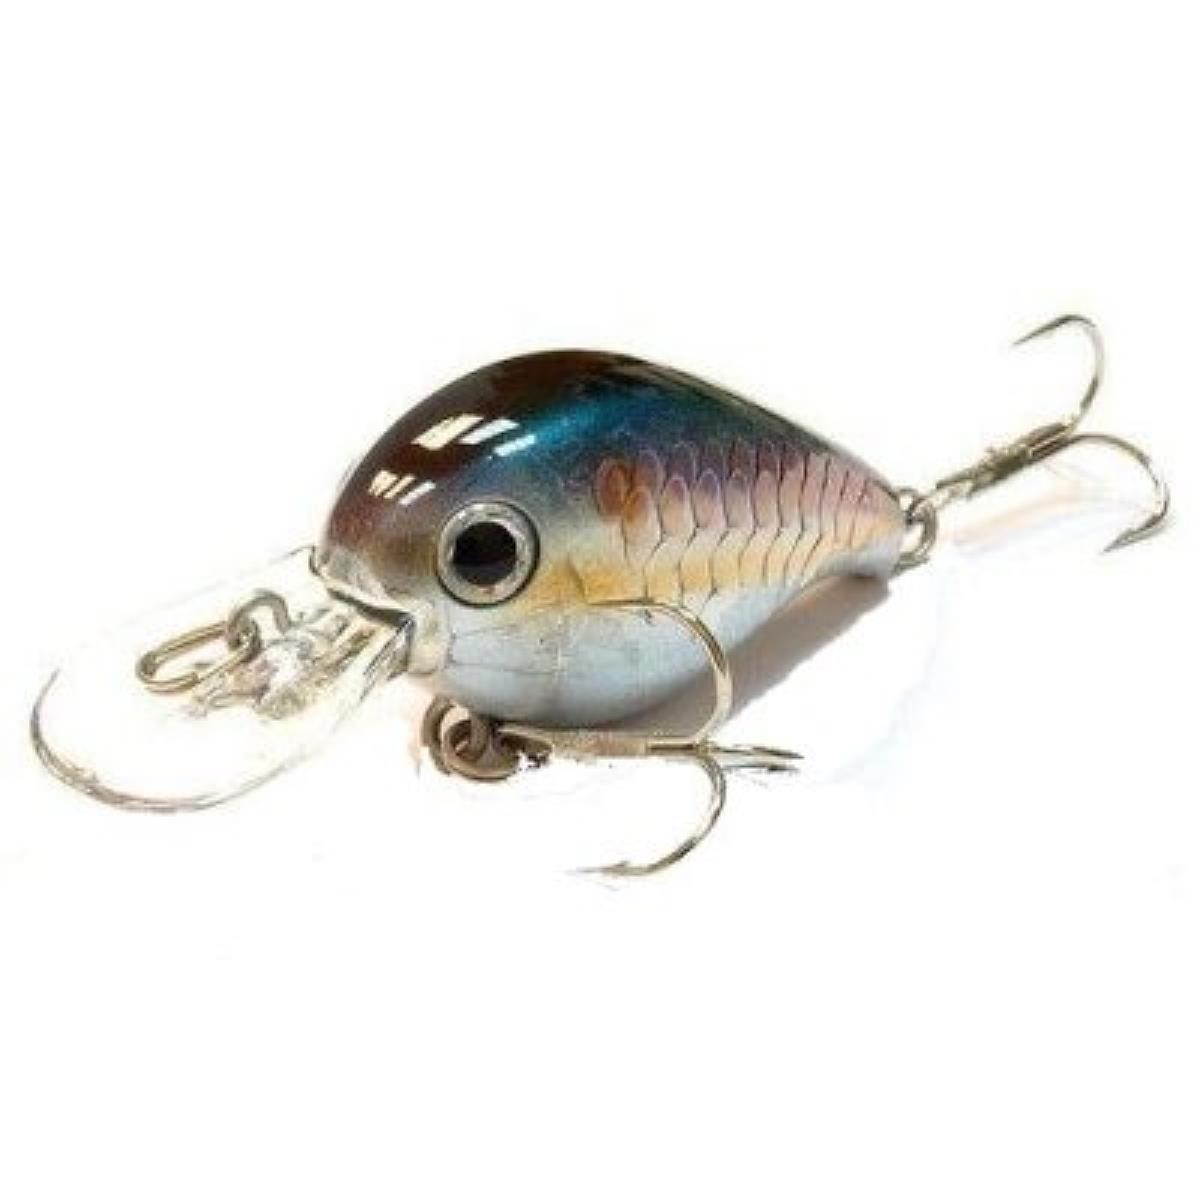 Воблер Clutch MR 270 MS American Shad Lucky Craft воблер clutch xd 077 original tennessee shad lucky craft